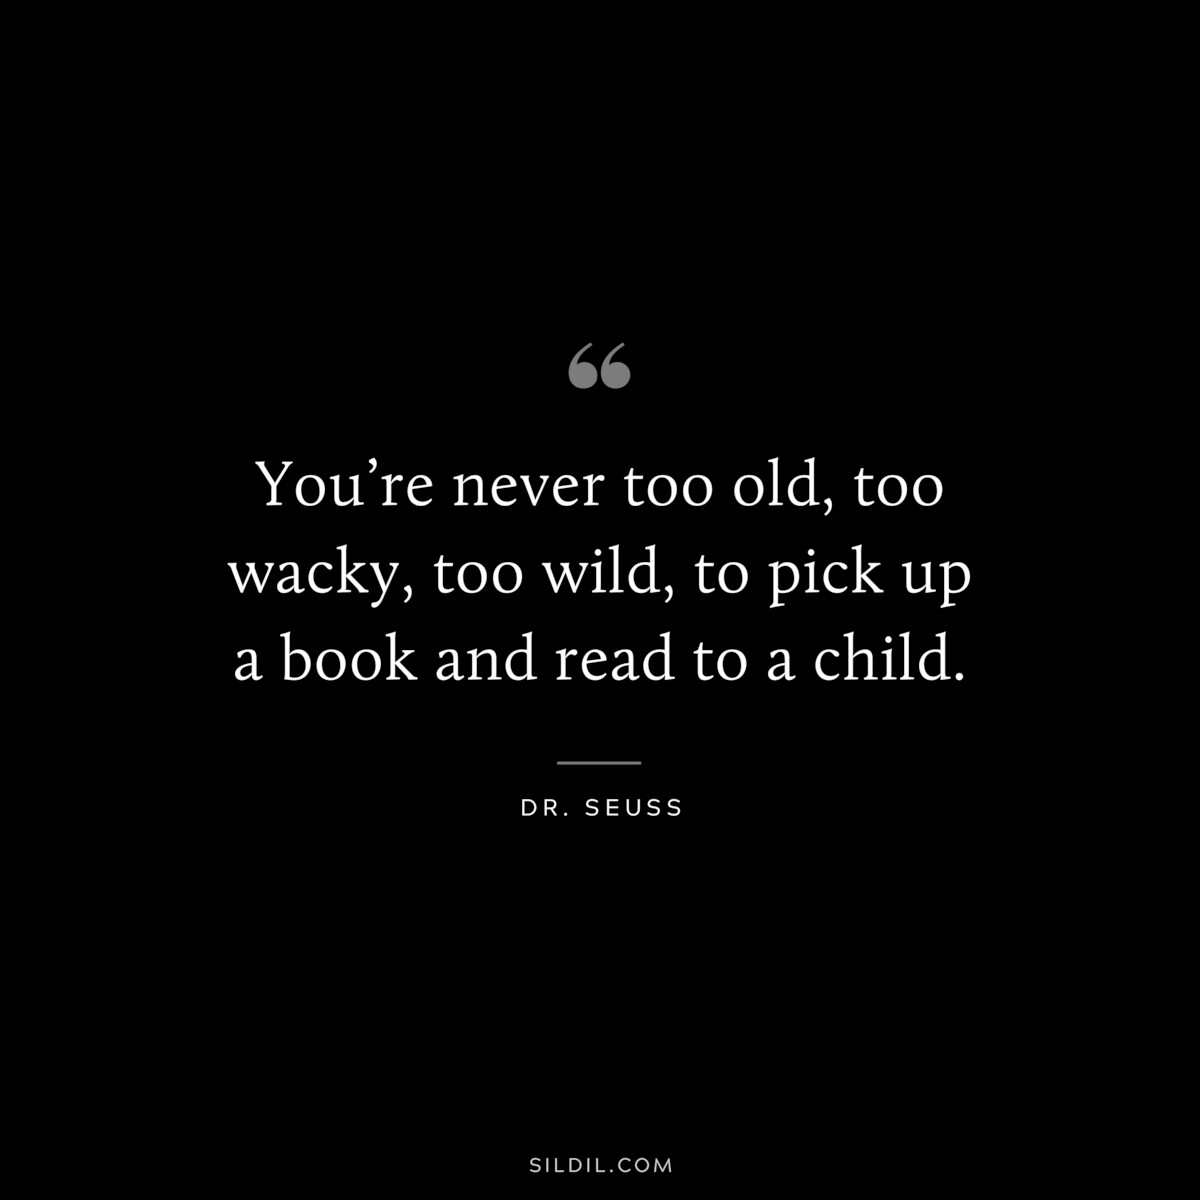 You’re never too old, too wacky, too wild, to pick up a book and read to a child. ― Dr. Seuss